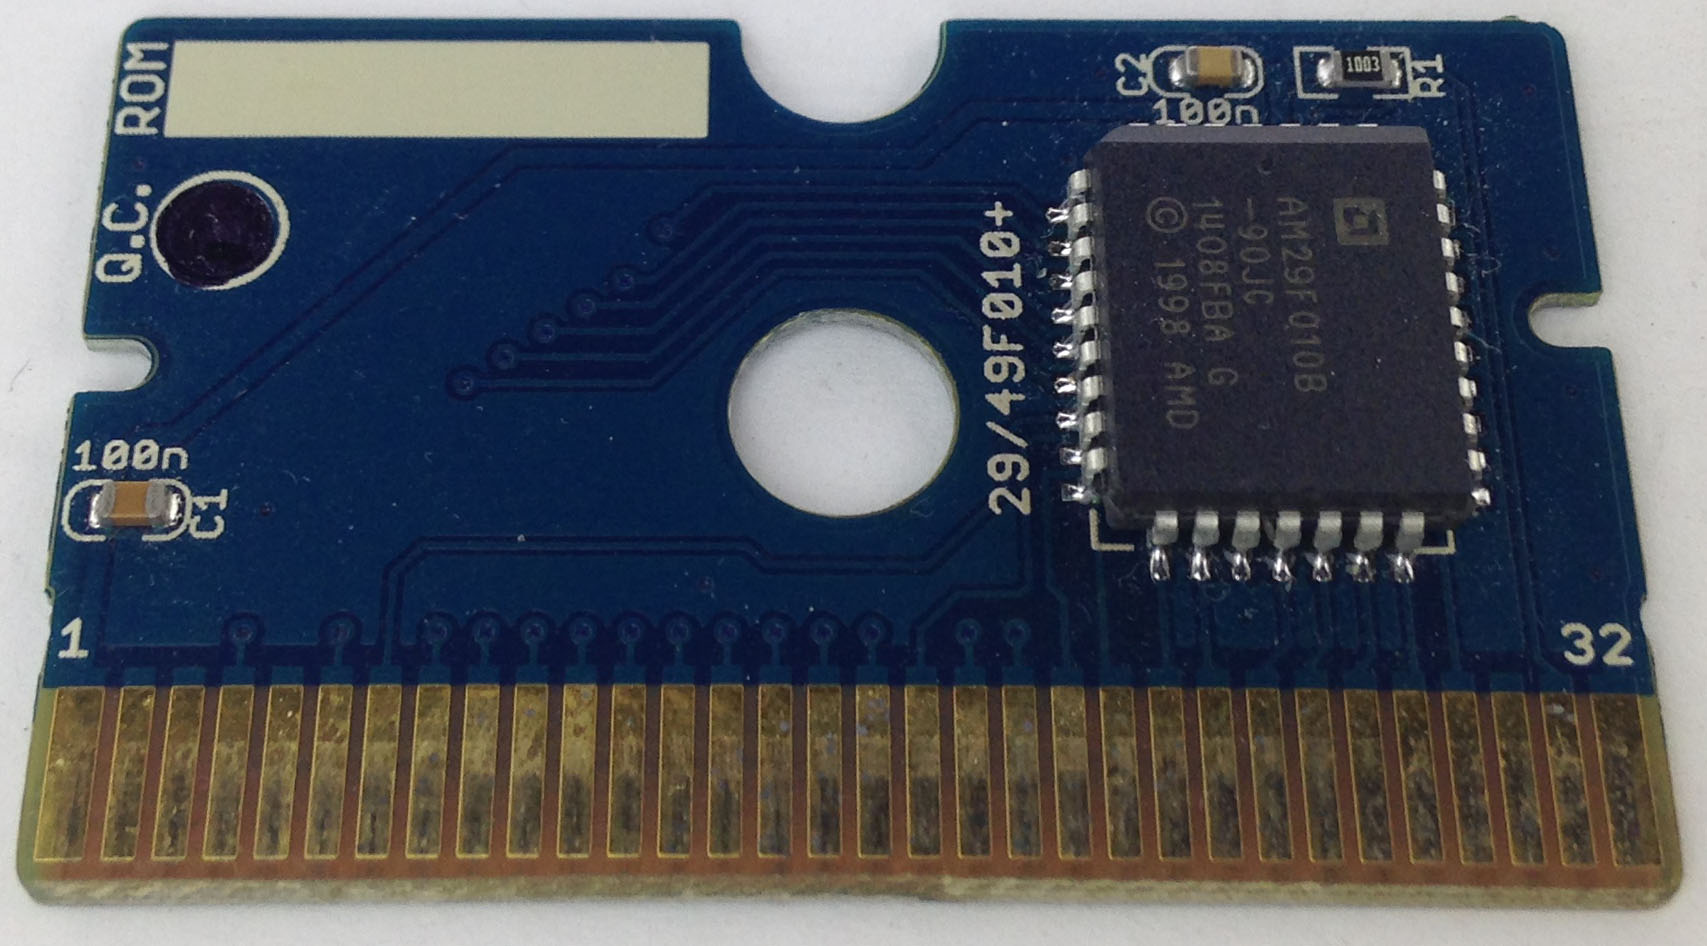 Flash cartridge for SNES lets you get your ROM on